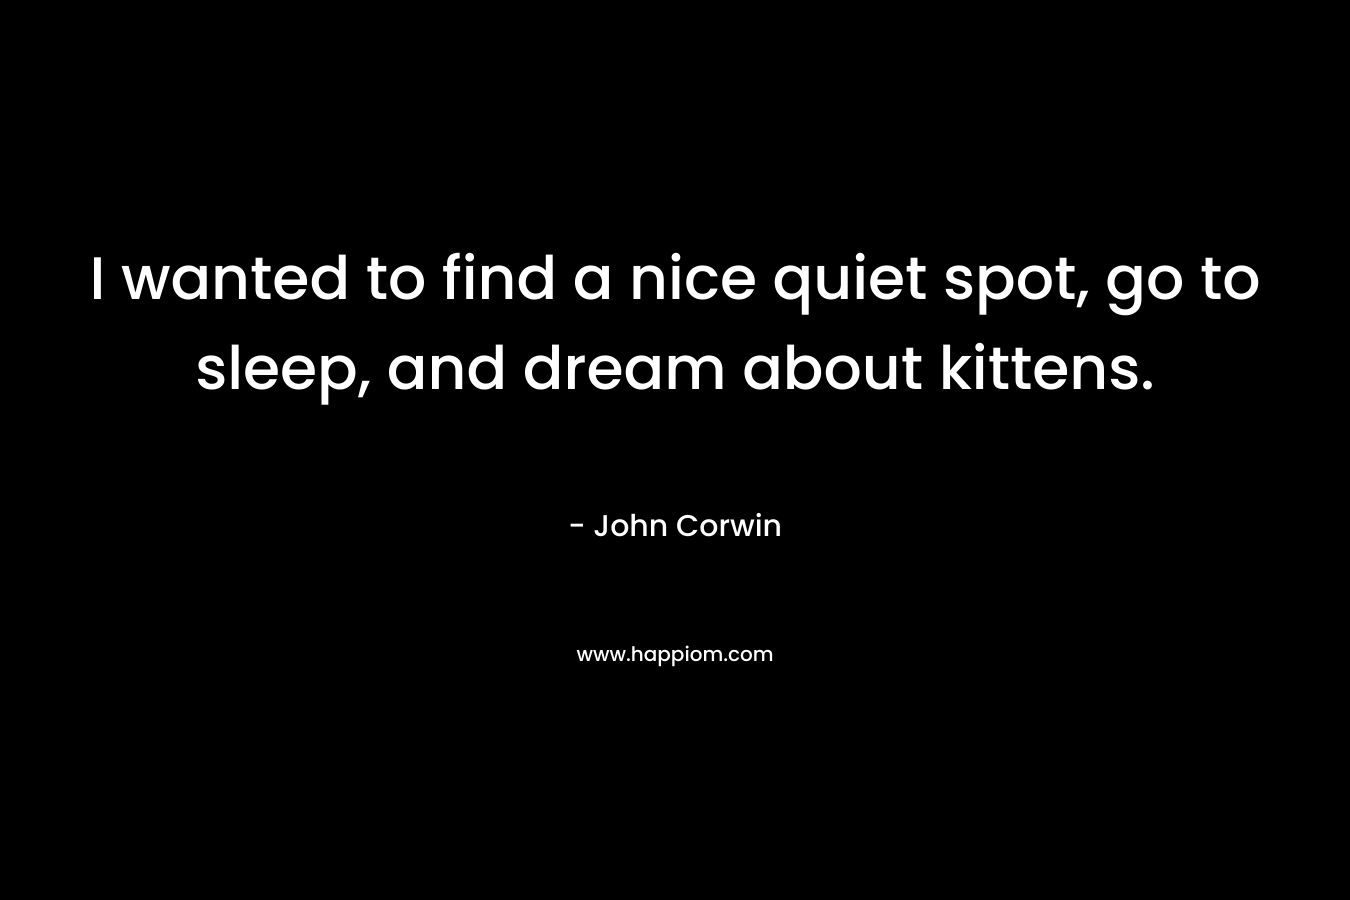 I wanted to find a nice quiet spot, go to sleep, and dream about kittens.